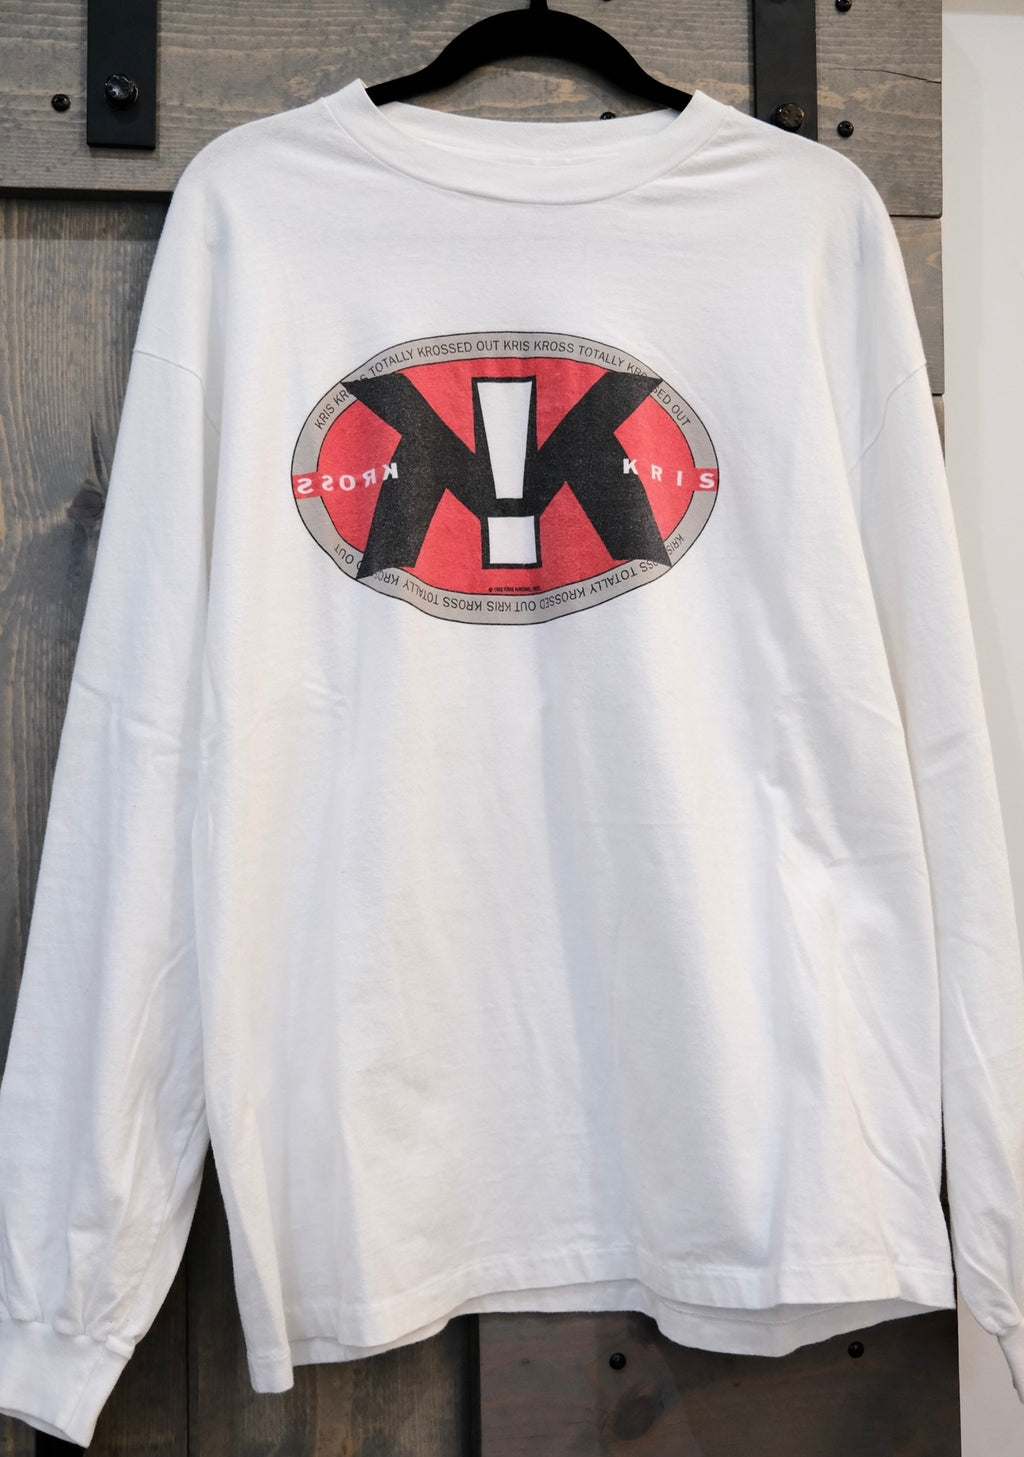 Kris Kross Promo T-shirt (Totally Crossed Out)